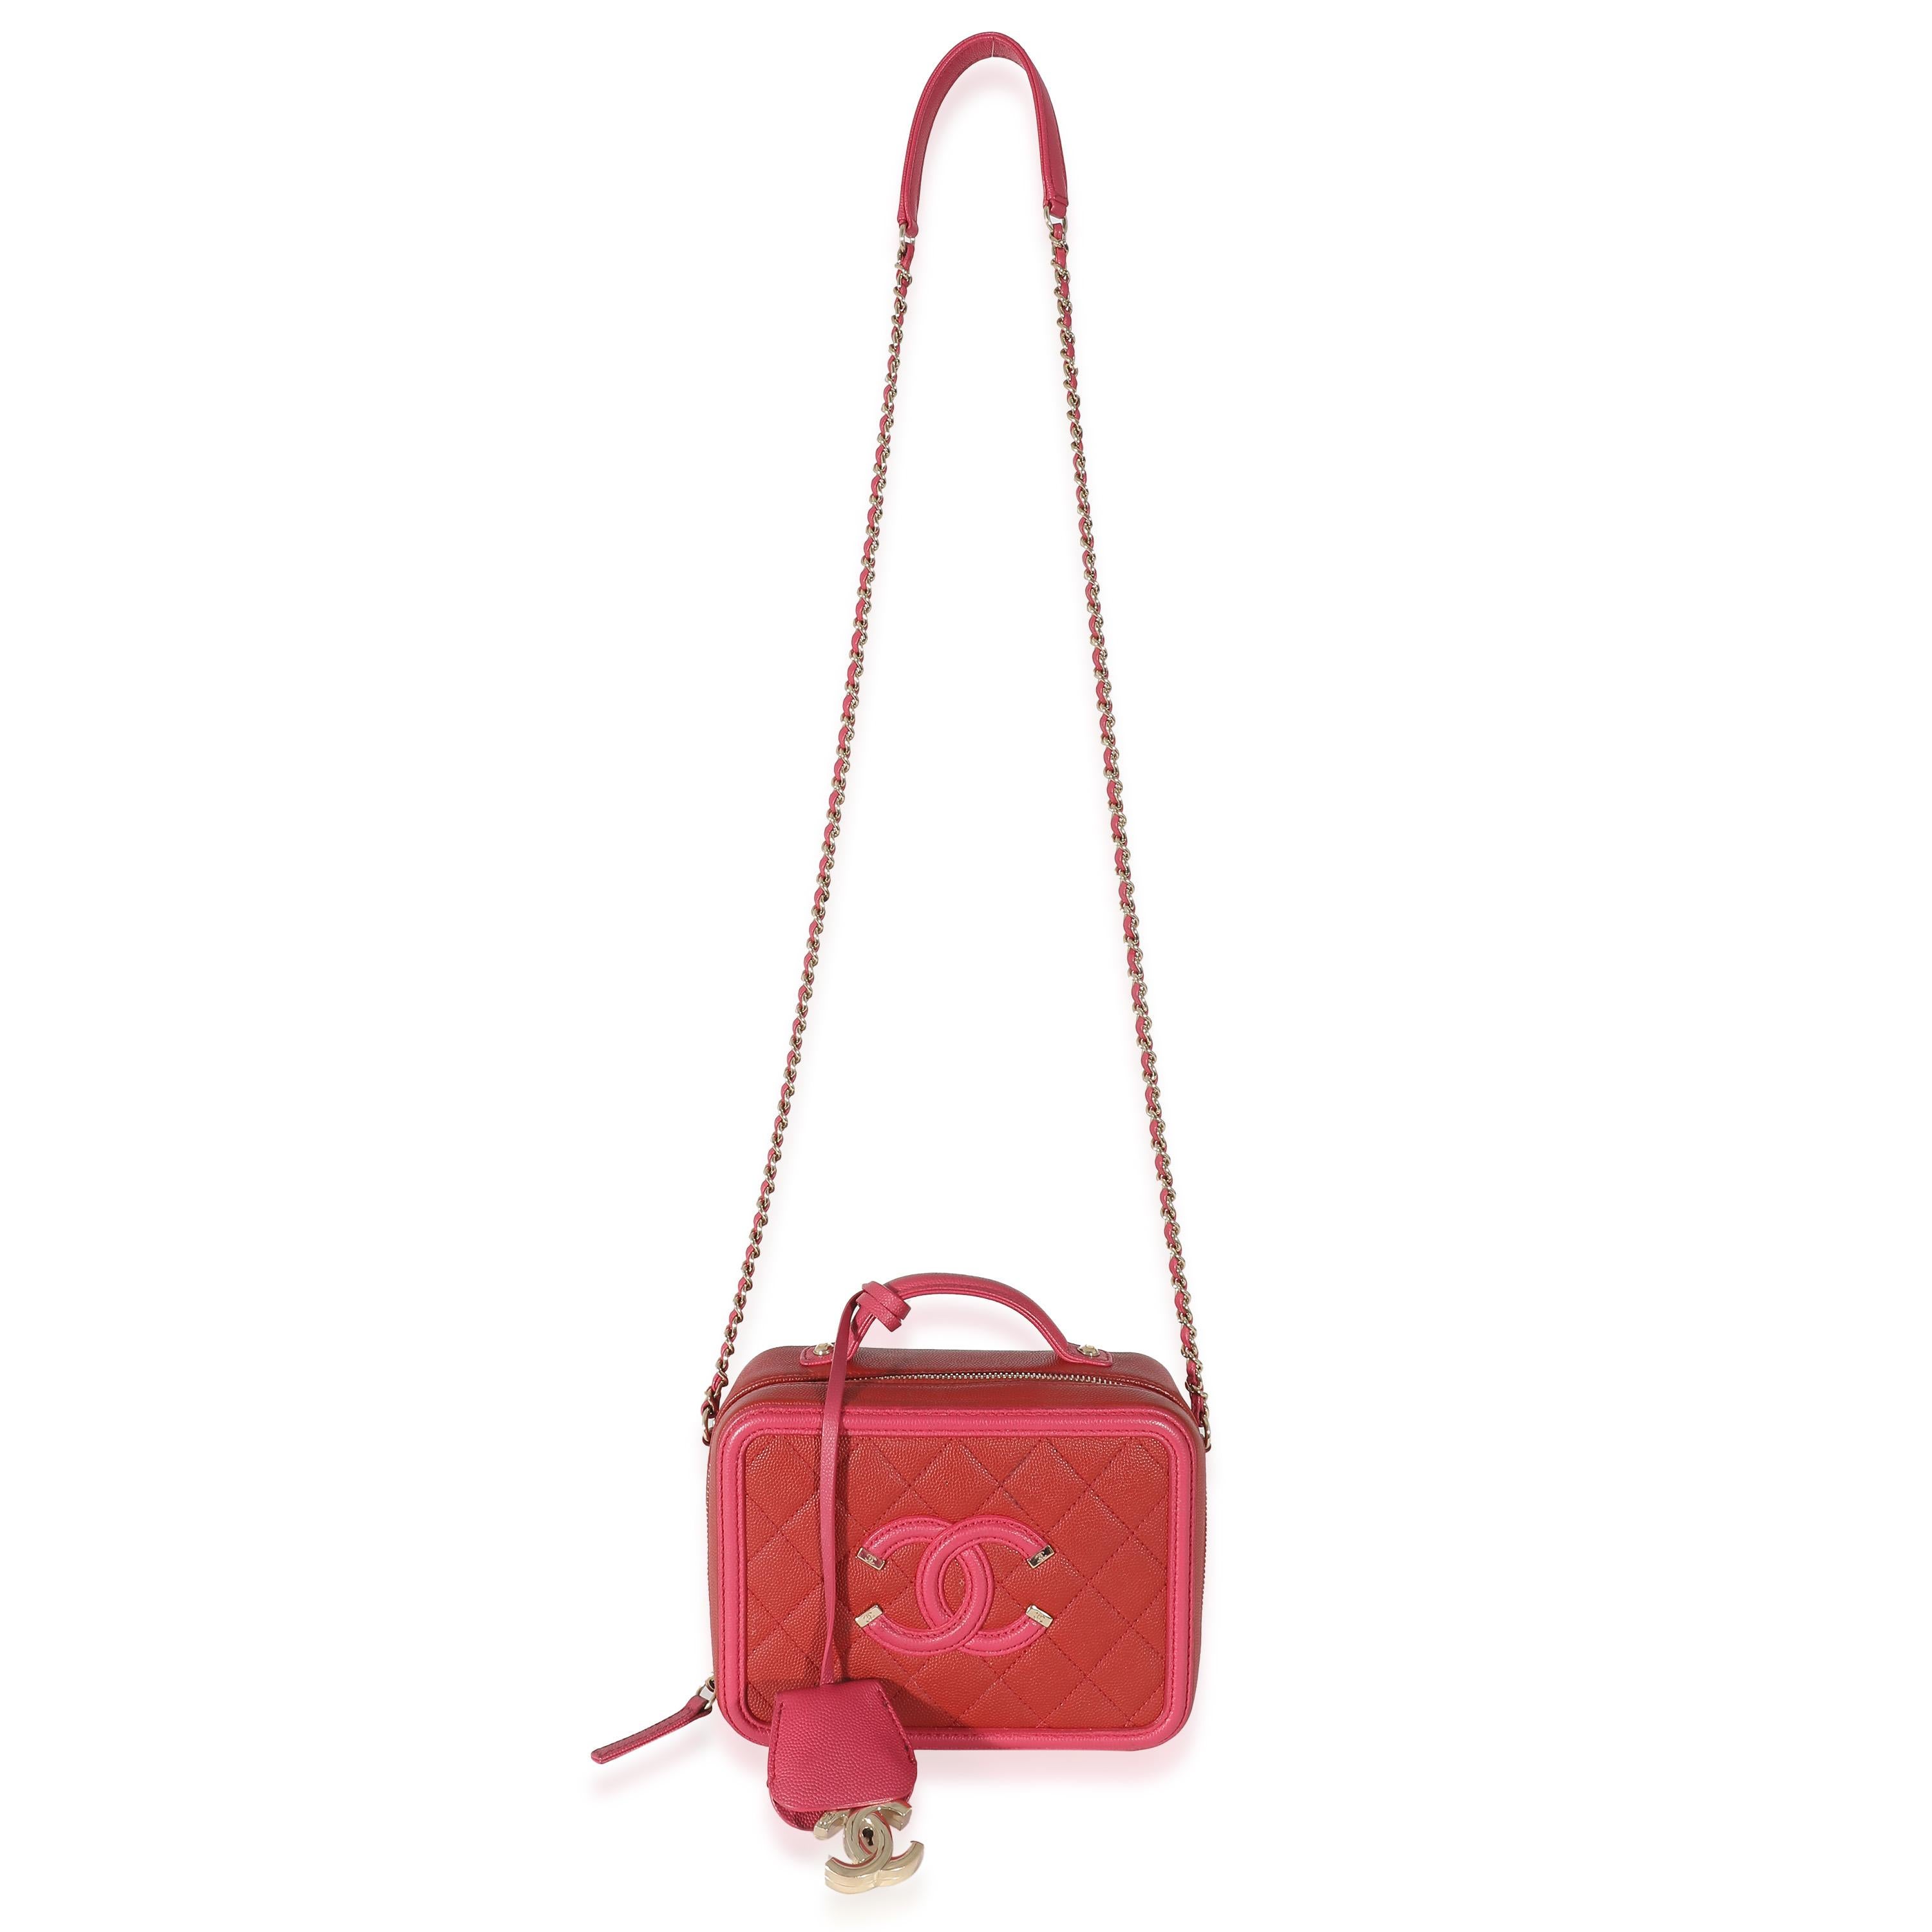 Listing Title: Chanel Red Pink Caviar Mini Filigree Vanity Case
SKU: 133160
Condition: Pre-owned 
Handbag Condition: Very Good
Condition Comments: Item is in very good condition with minor signs of wear. Exterior scuffing and discoloration